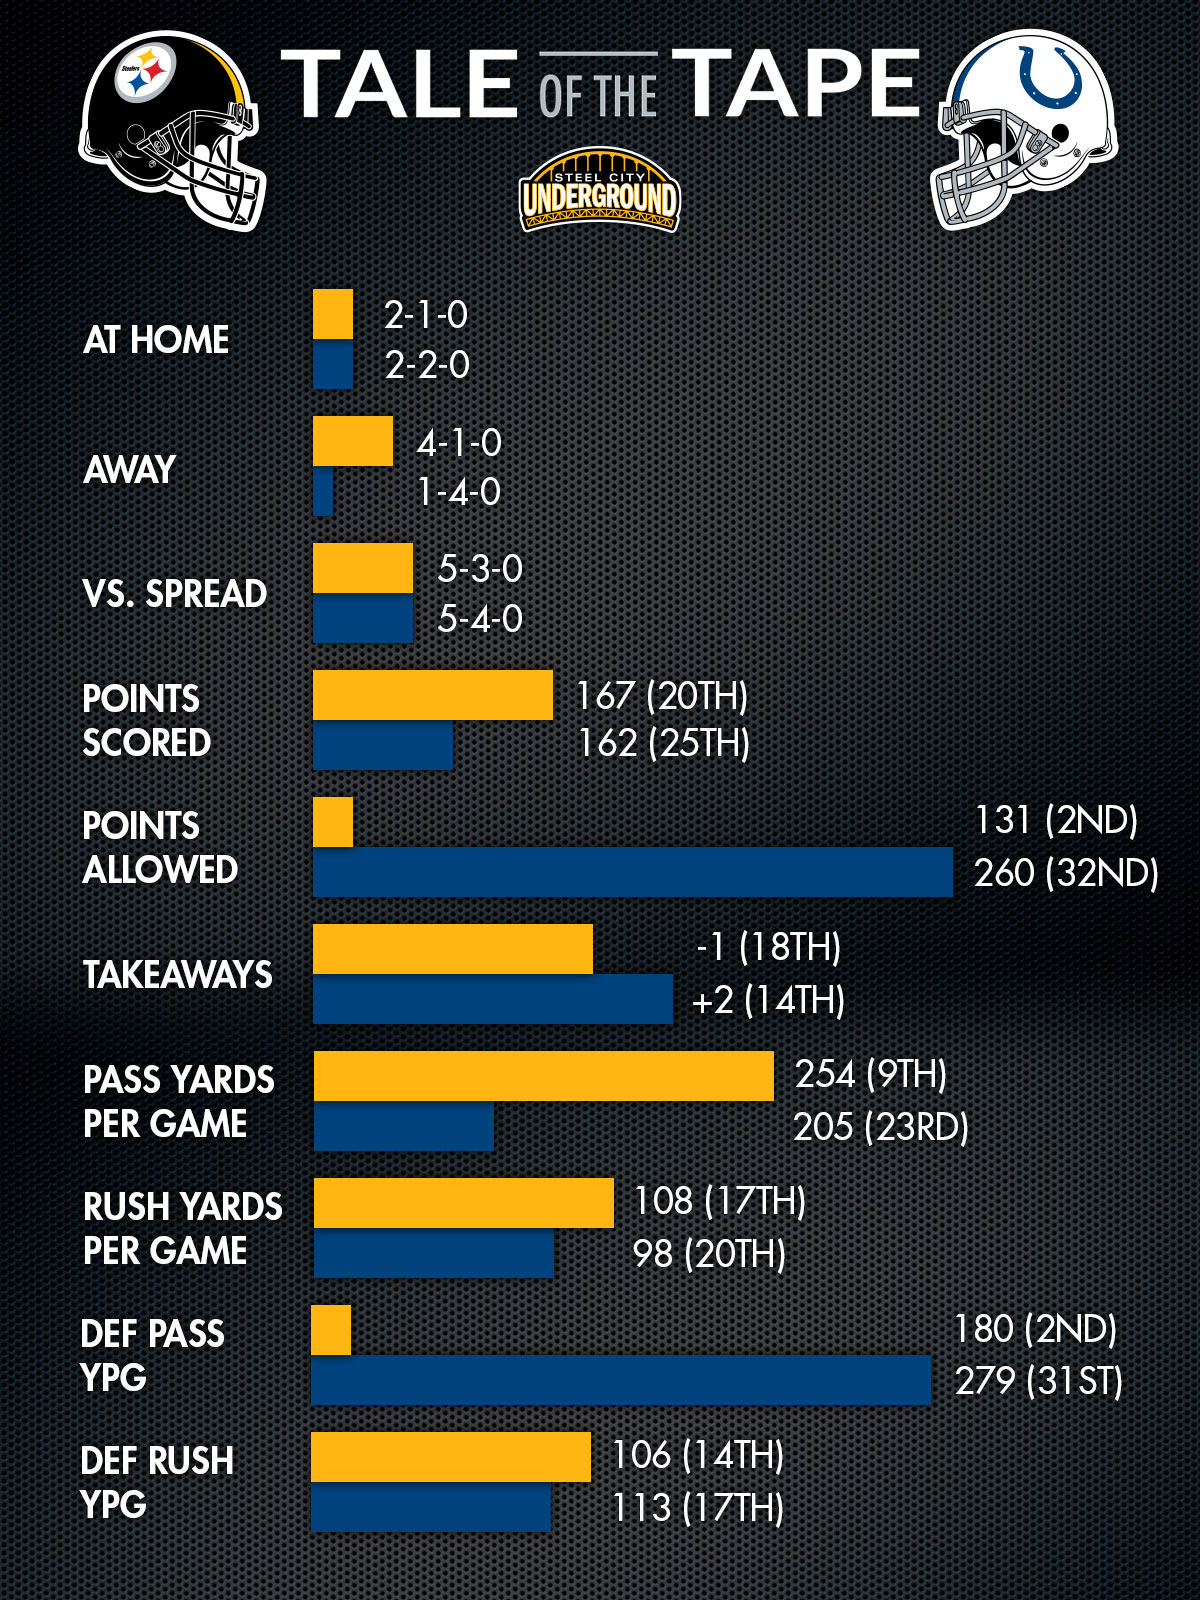 Steelers vs. Colts Tale of the Tape